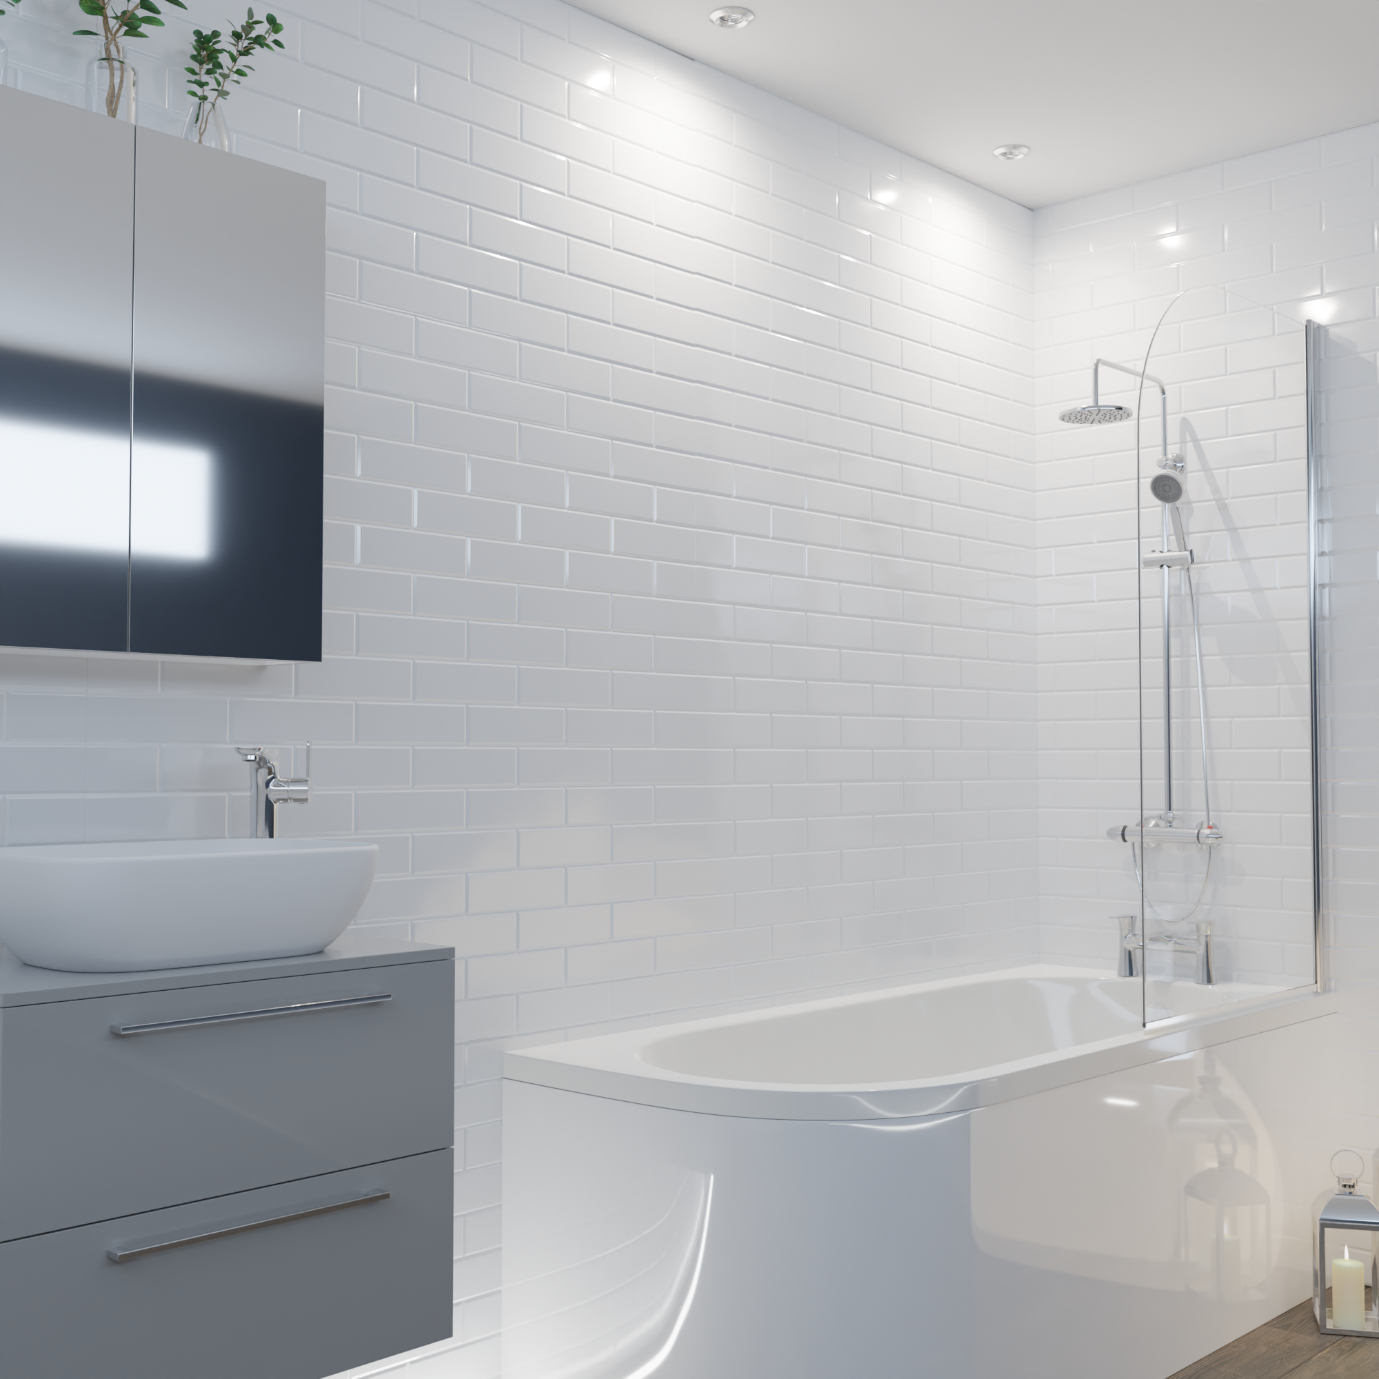 Modern Bathroom with White Brick-Effect Tiles, a Shower Bath, a Wall Hung Basin Vanity Unit and Mirrored Cabinets